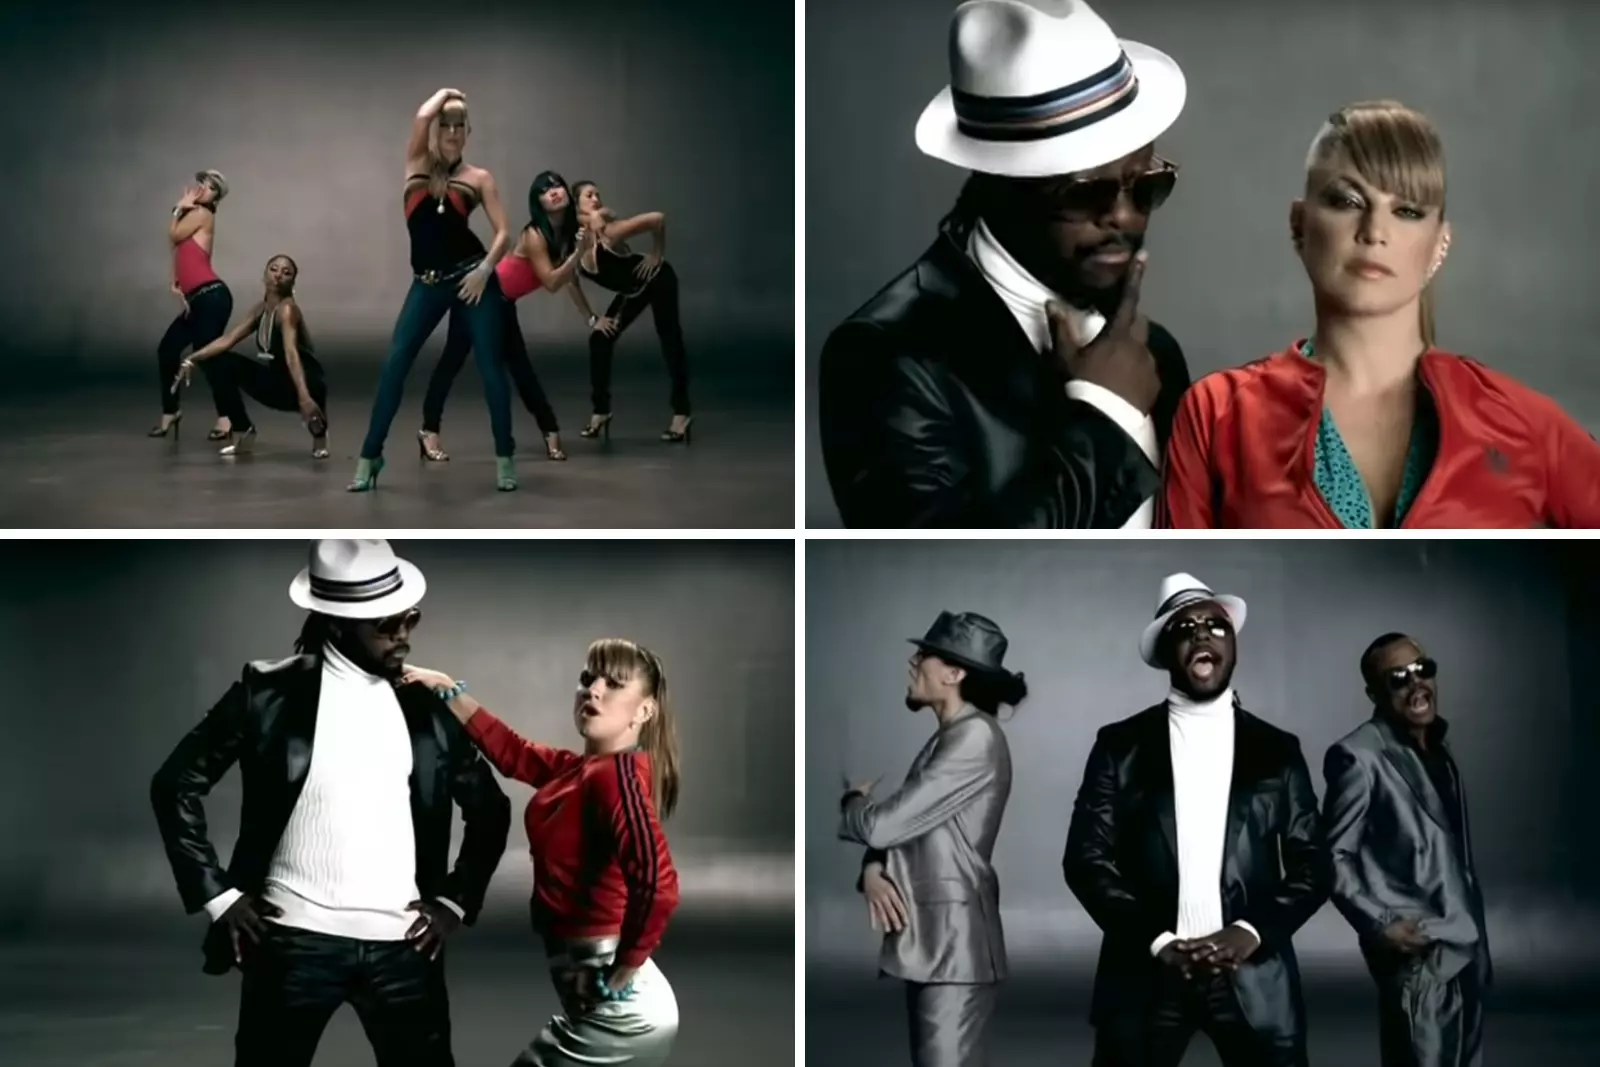 Throwback Thursday 'My Humps' by The Black Eyed Peas (2005)